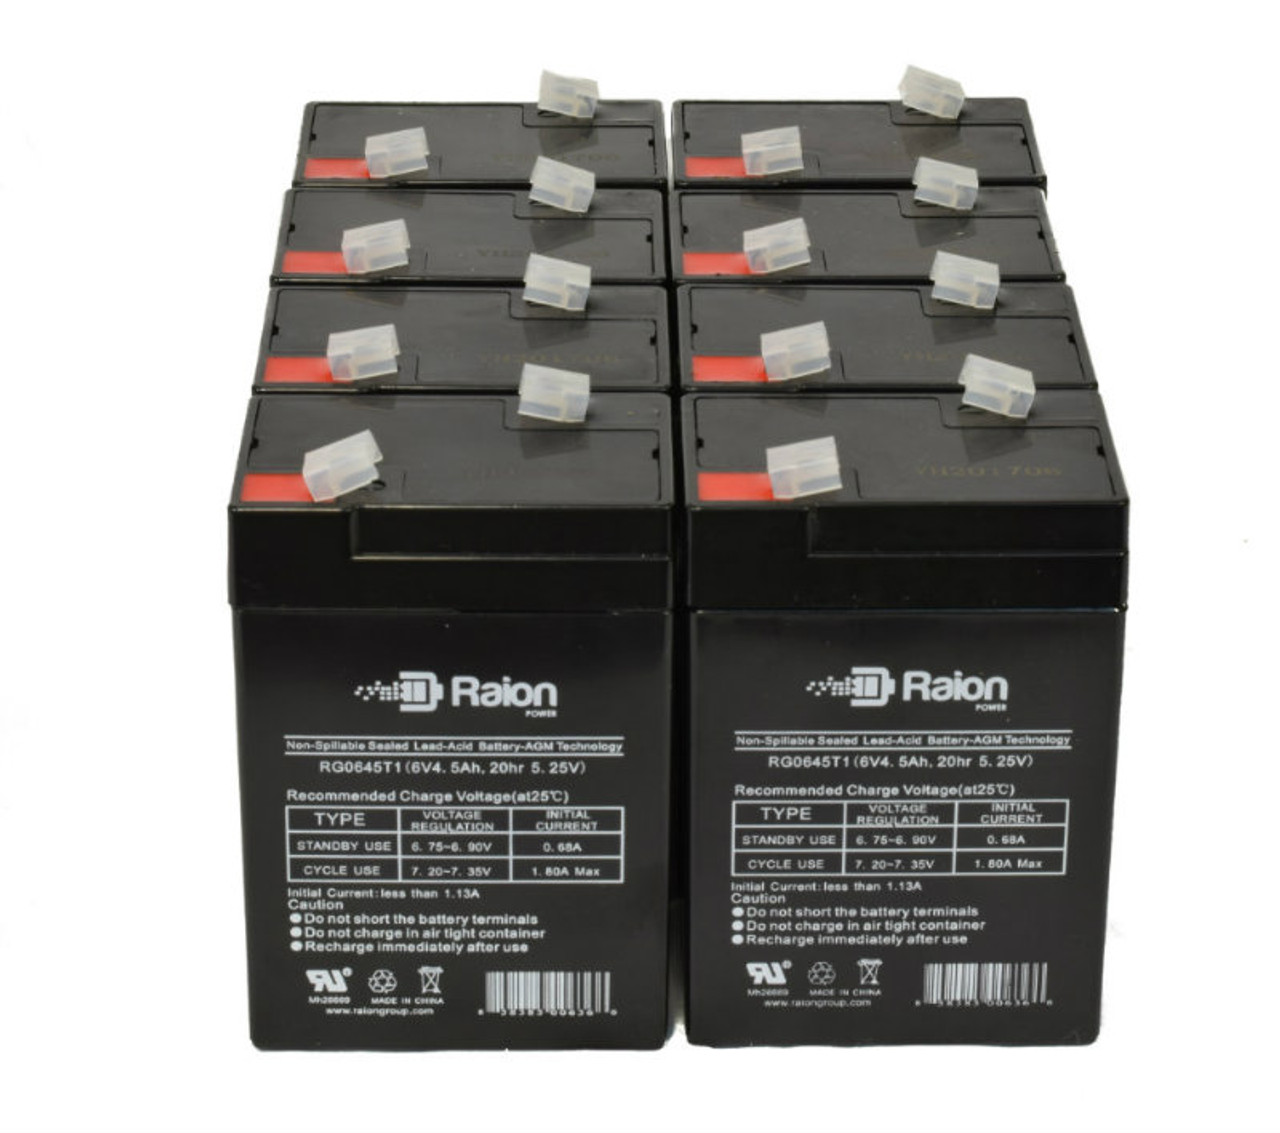 Raion Power RG0645T1 6V 4.5Ah Replacement Medical Equipment Battery for Nellcor NPB 290 - 8 Pack